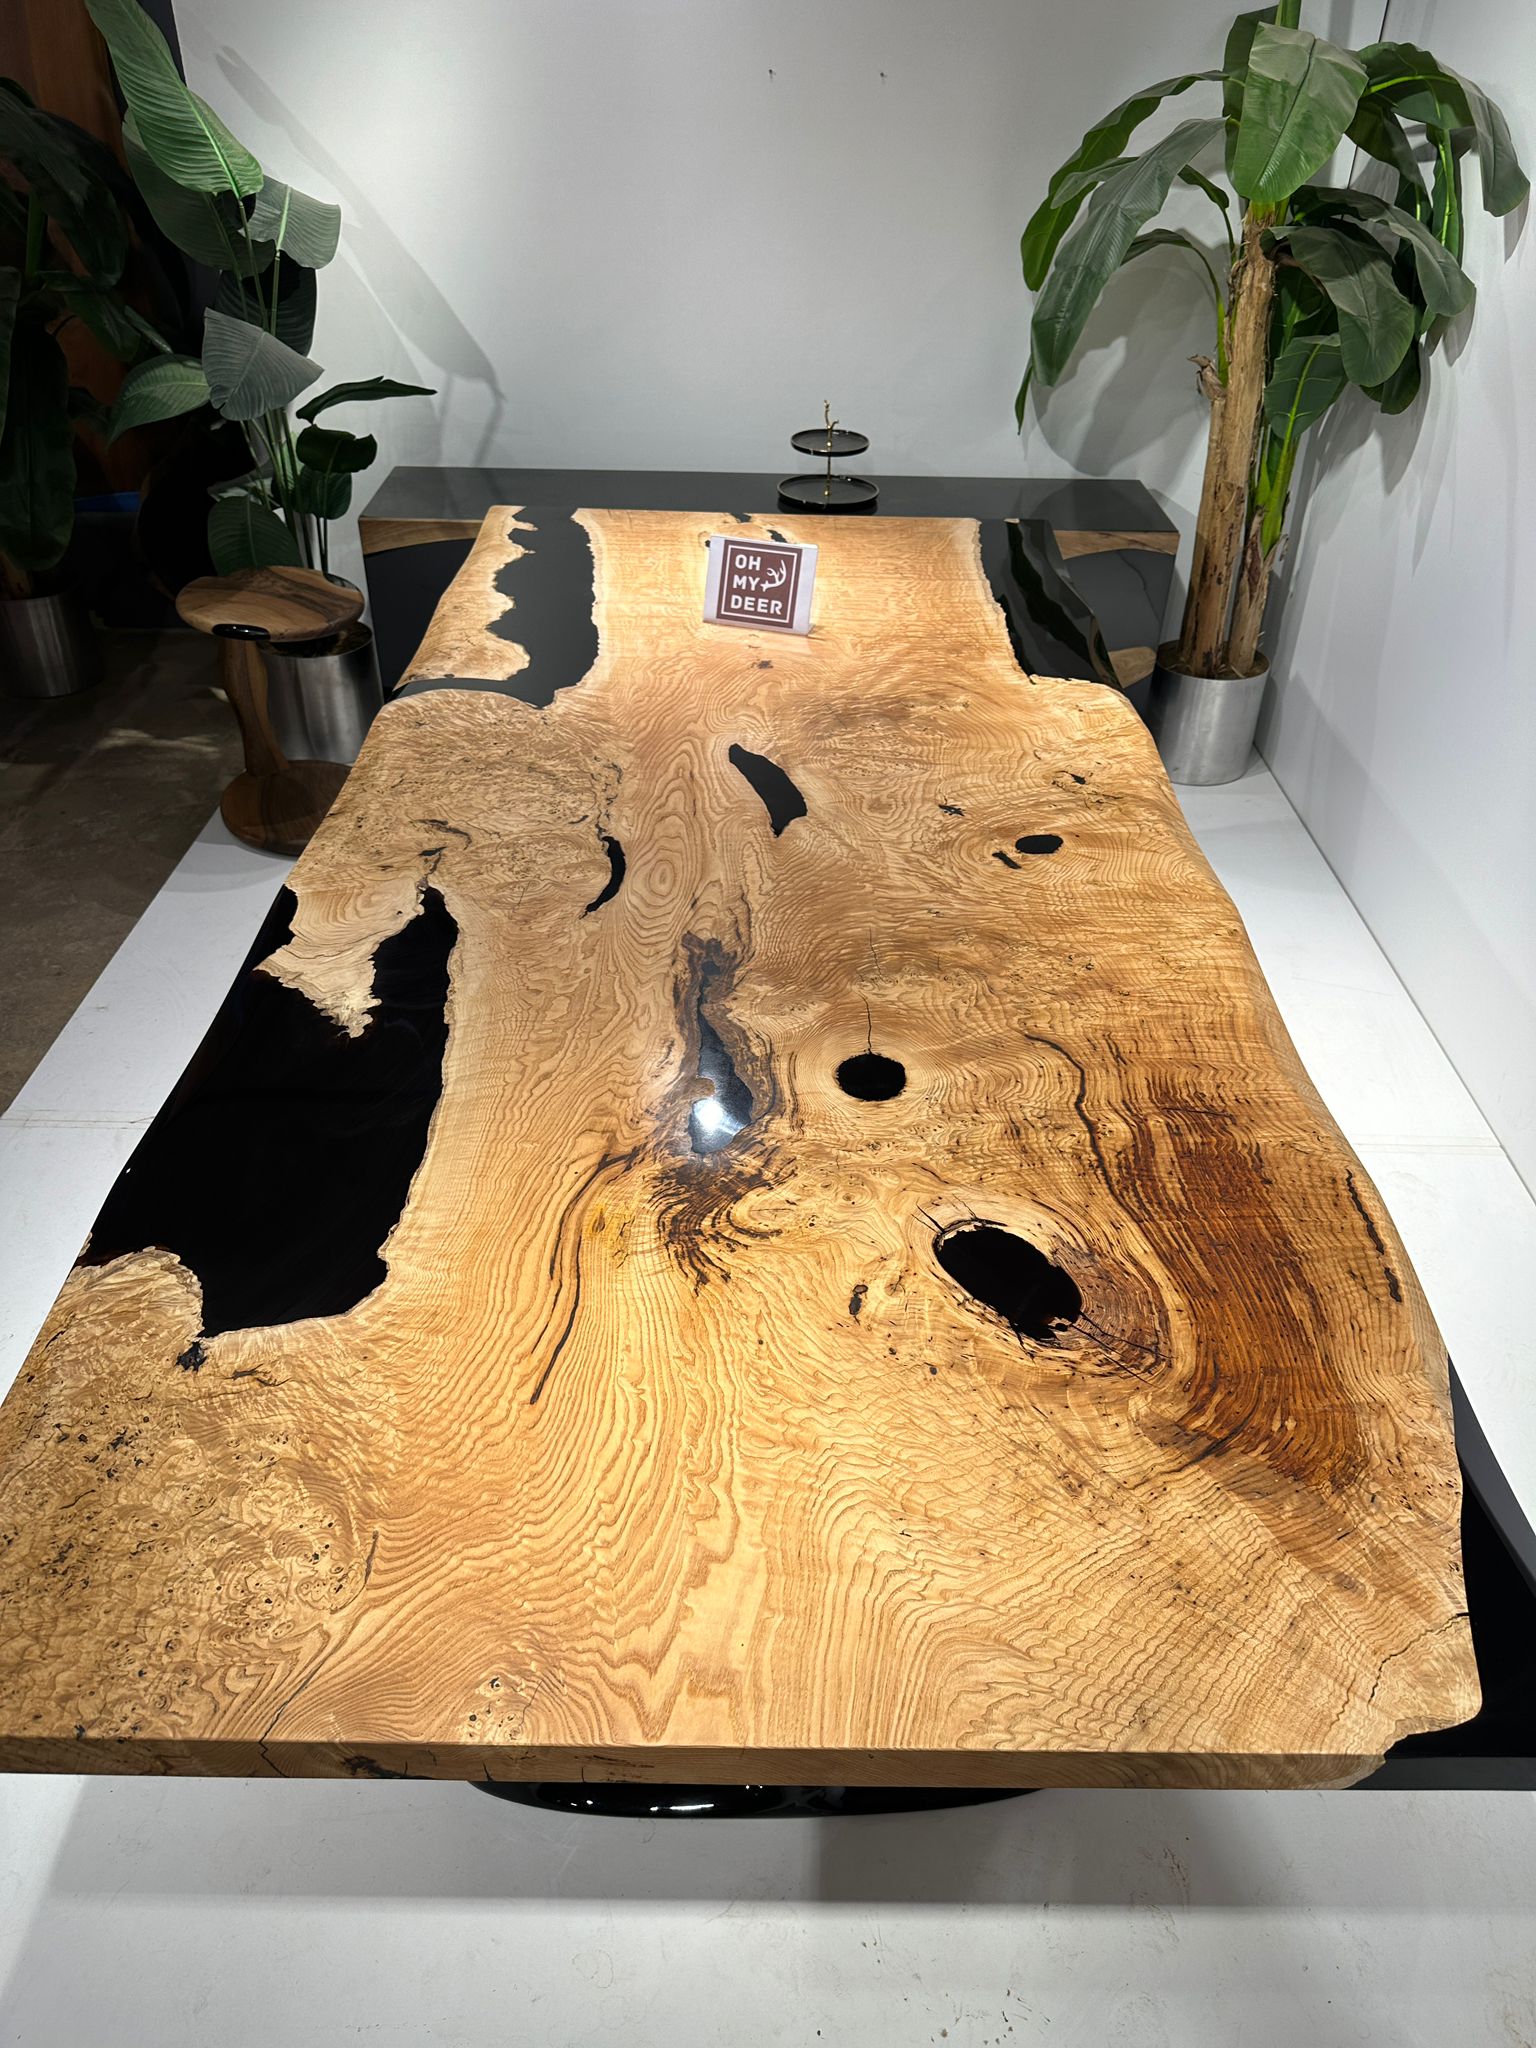 chestnut wood dining table, epoxy dining table, epoxy dining table austria, epoxy,epoxy river table, river table, river, epoxy resin table, custom made furniture, exclusive tables, epoxy table, johannes forkl, forkl, oh my deer, omd, buy epoxy table, buy epoxy table austria, epoxy tables, epoxy tables, epoxy table river, epoxy dining table, epoxy table chestnut wood, epoxy dining table black